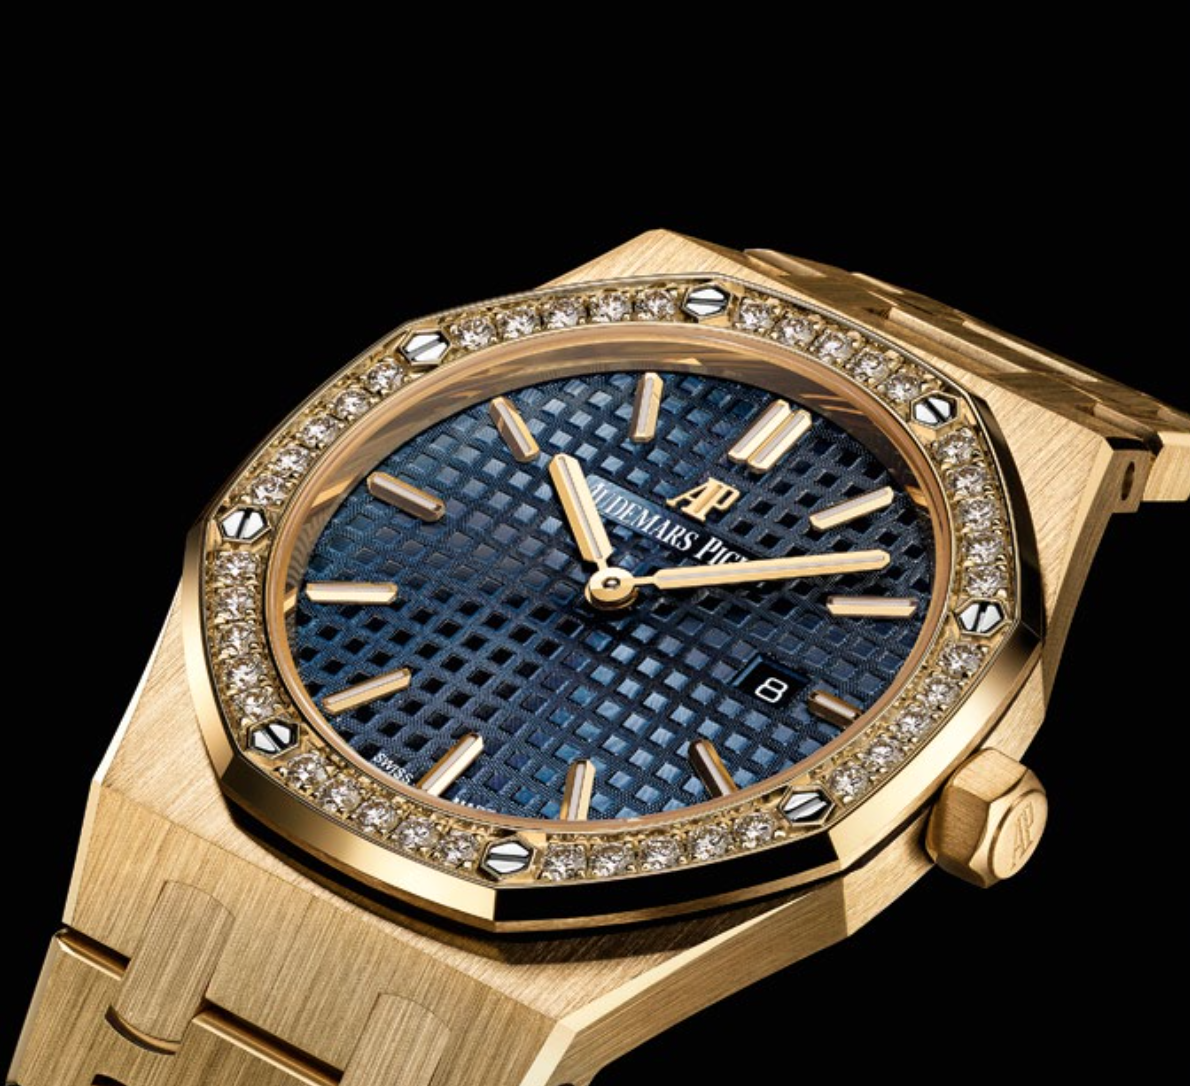 The return of Yellow Gold with Audemars Piguet's latest additions ...